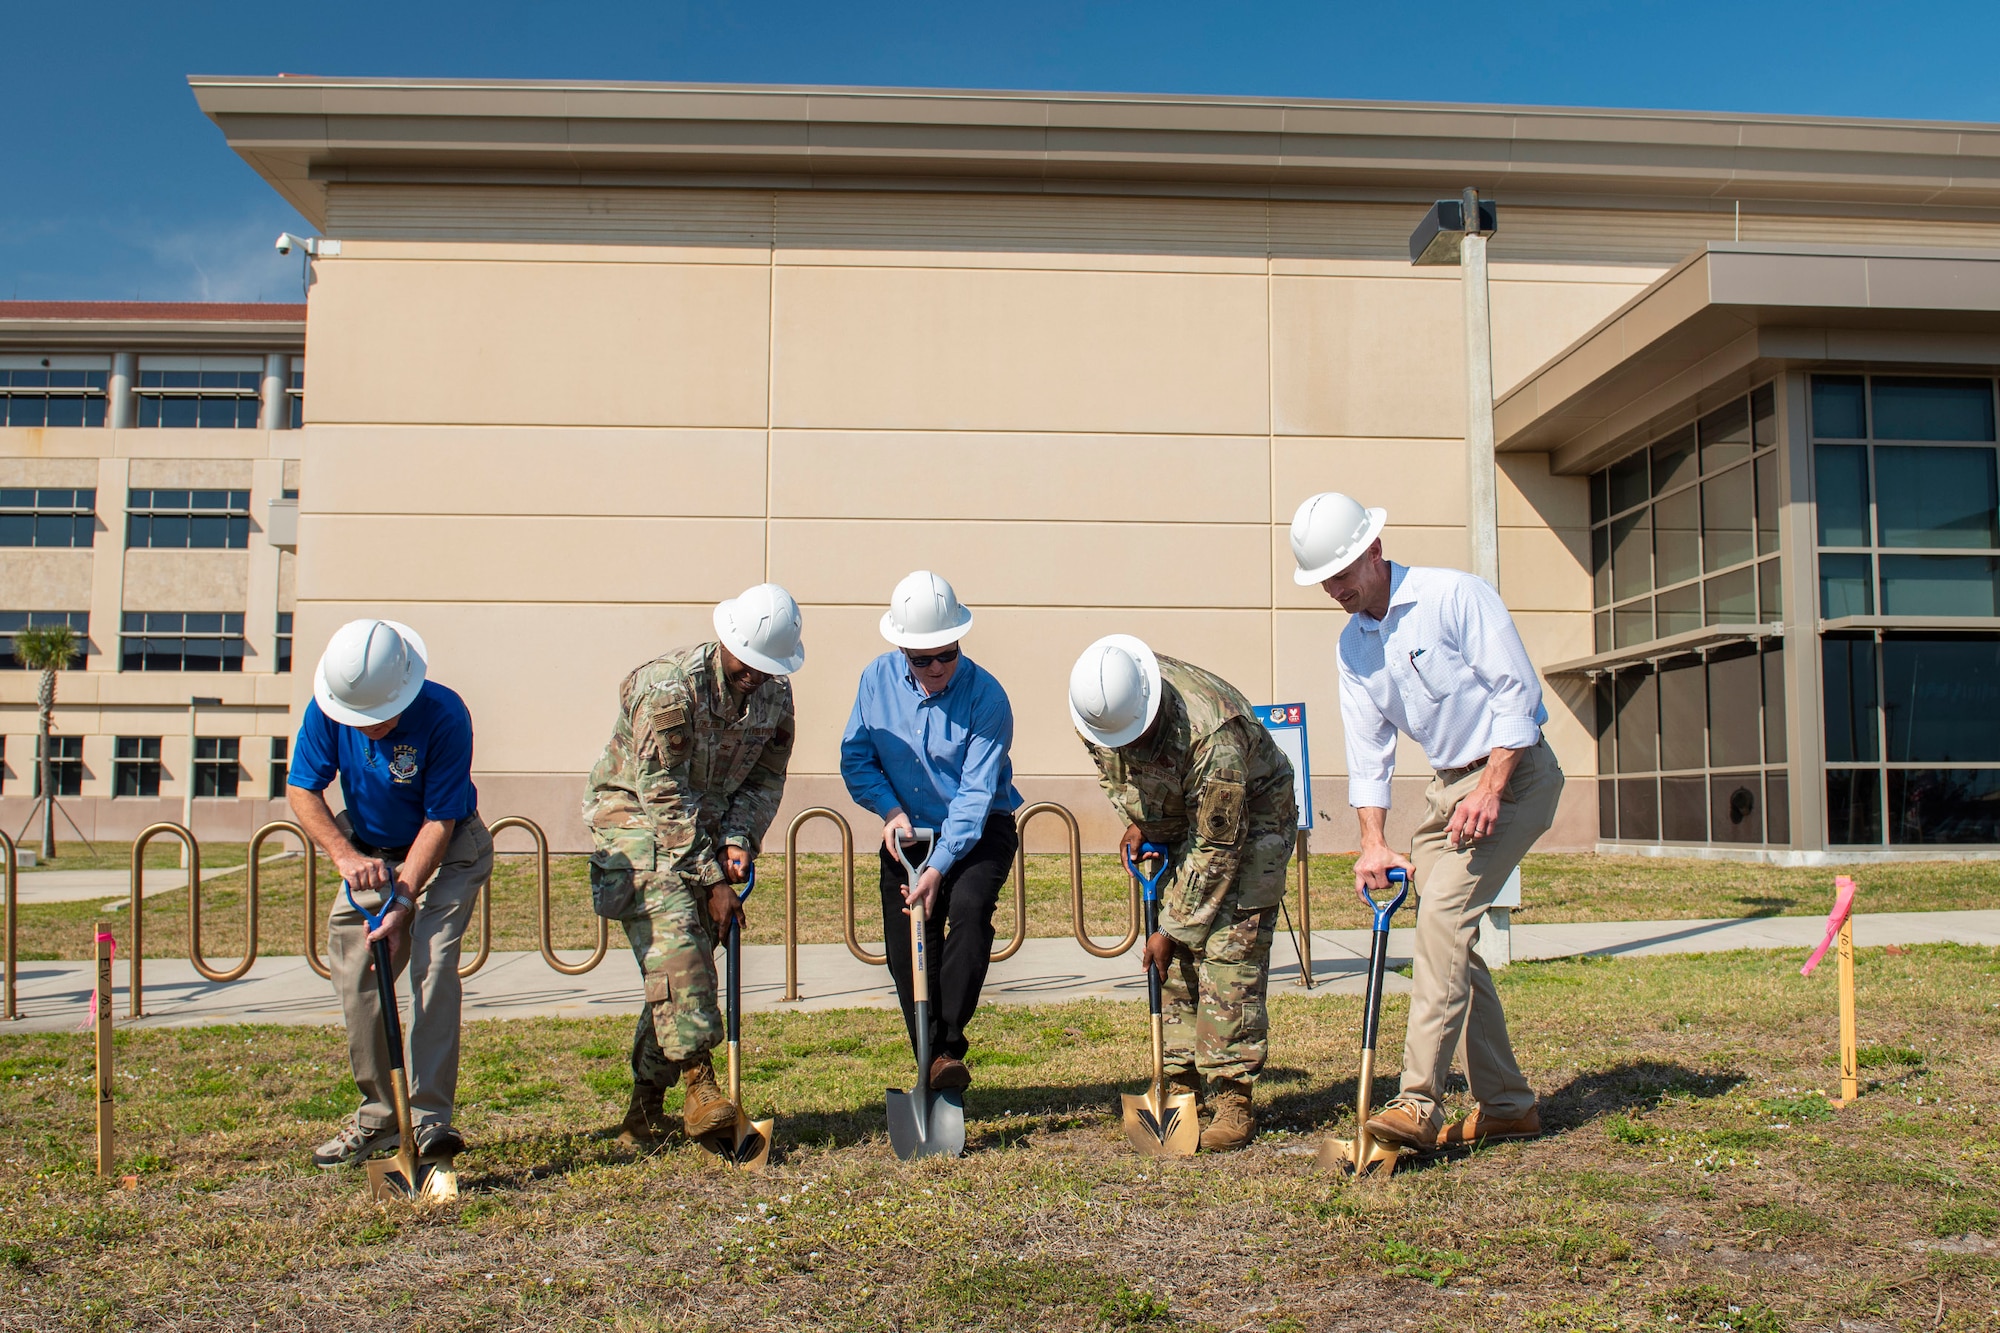 A team of leaders from the Air Force Technical Applications Center, Viera Builders, The Viera Company, Space Launch Delta 45, and the AFTAC Memorial Corporation use shovels to turn symbolically break ground for the new AFTAC Memorial at Patrick Space Force Base, Fla., Feb. 24, 2023.  The memorial will pay tribute to AFTAC personnel who lost their lives while in active government service..  Pictured are:  Lou Seiler, AFTAC Memorial Corp.; Col James A. Finlayson, AFTAC commander; Todd Pokrywa, The Viera Company president; Col. Anthony Graham, SLD 45 vice commander; and Nick Crowe, Viera Builders executive vice president.  (U.S. Air Force photo by Matthew S. Jurgens)